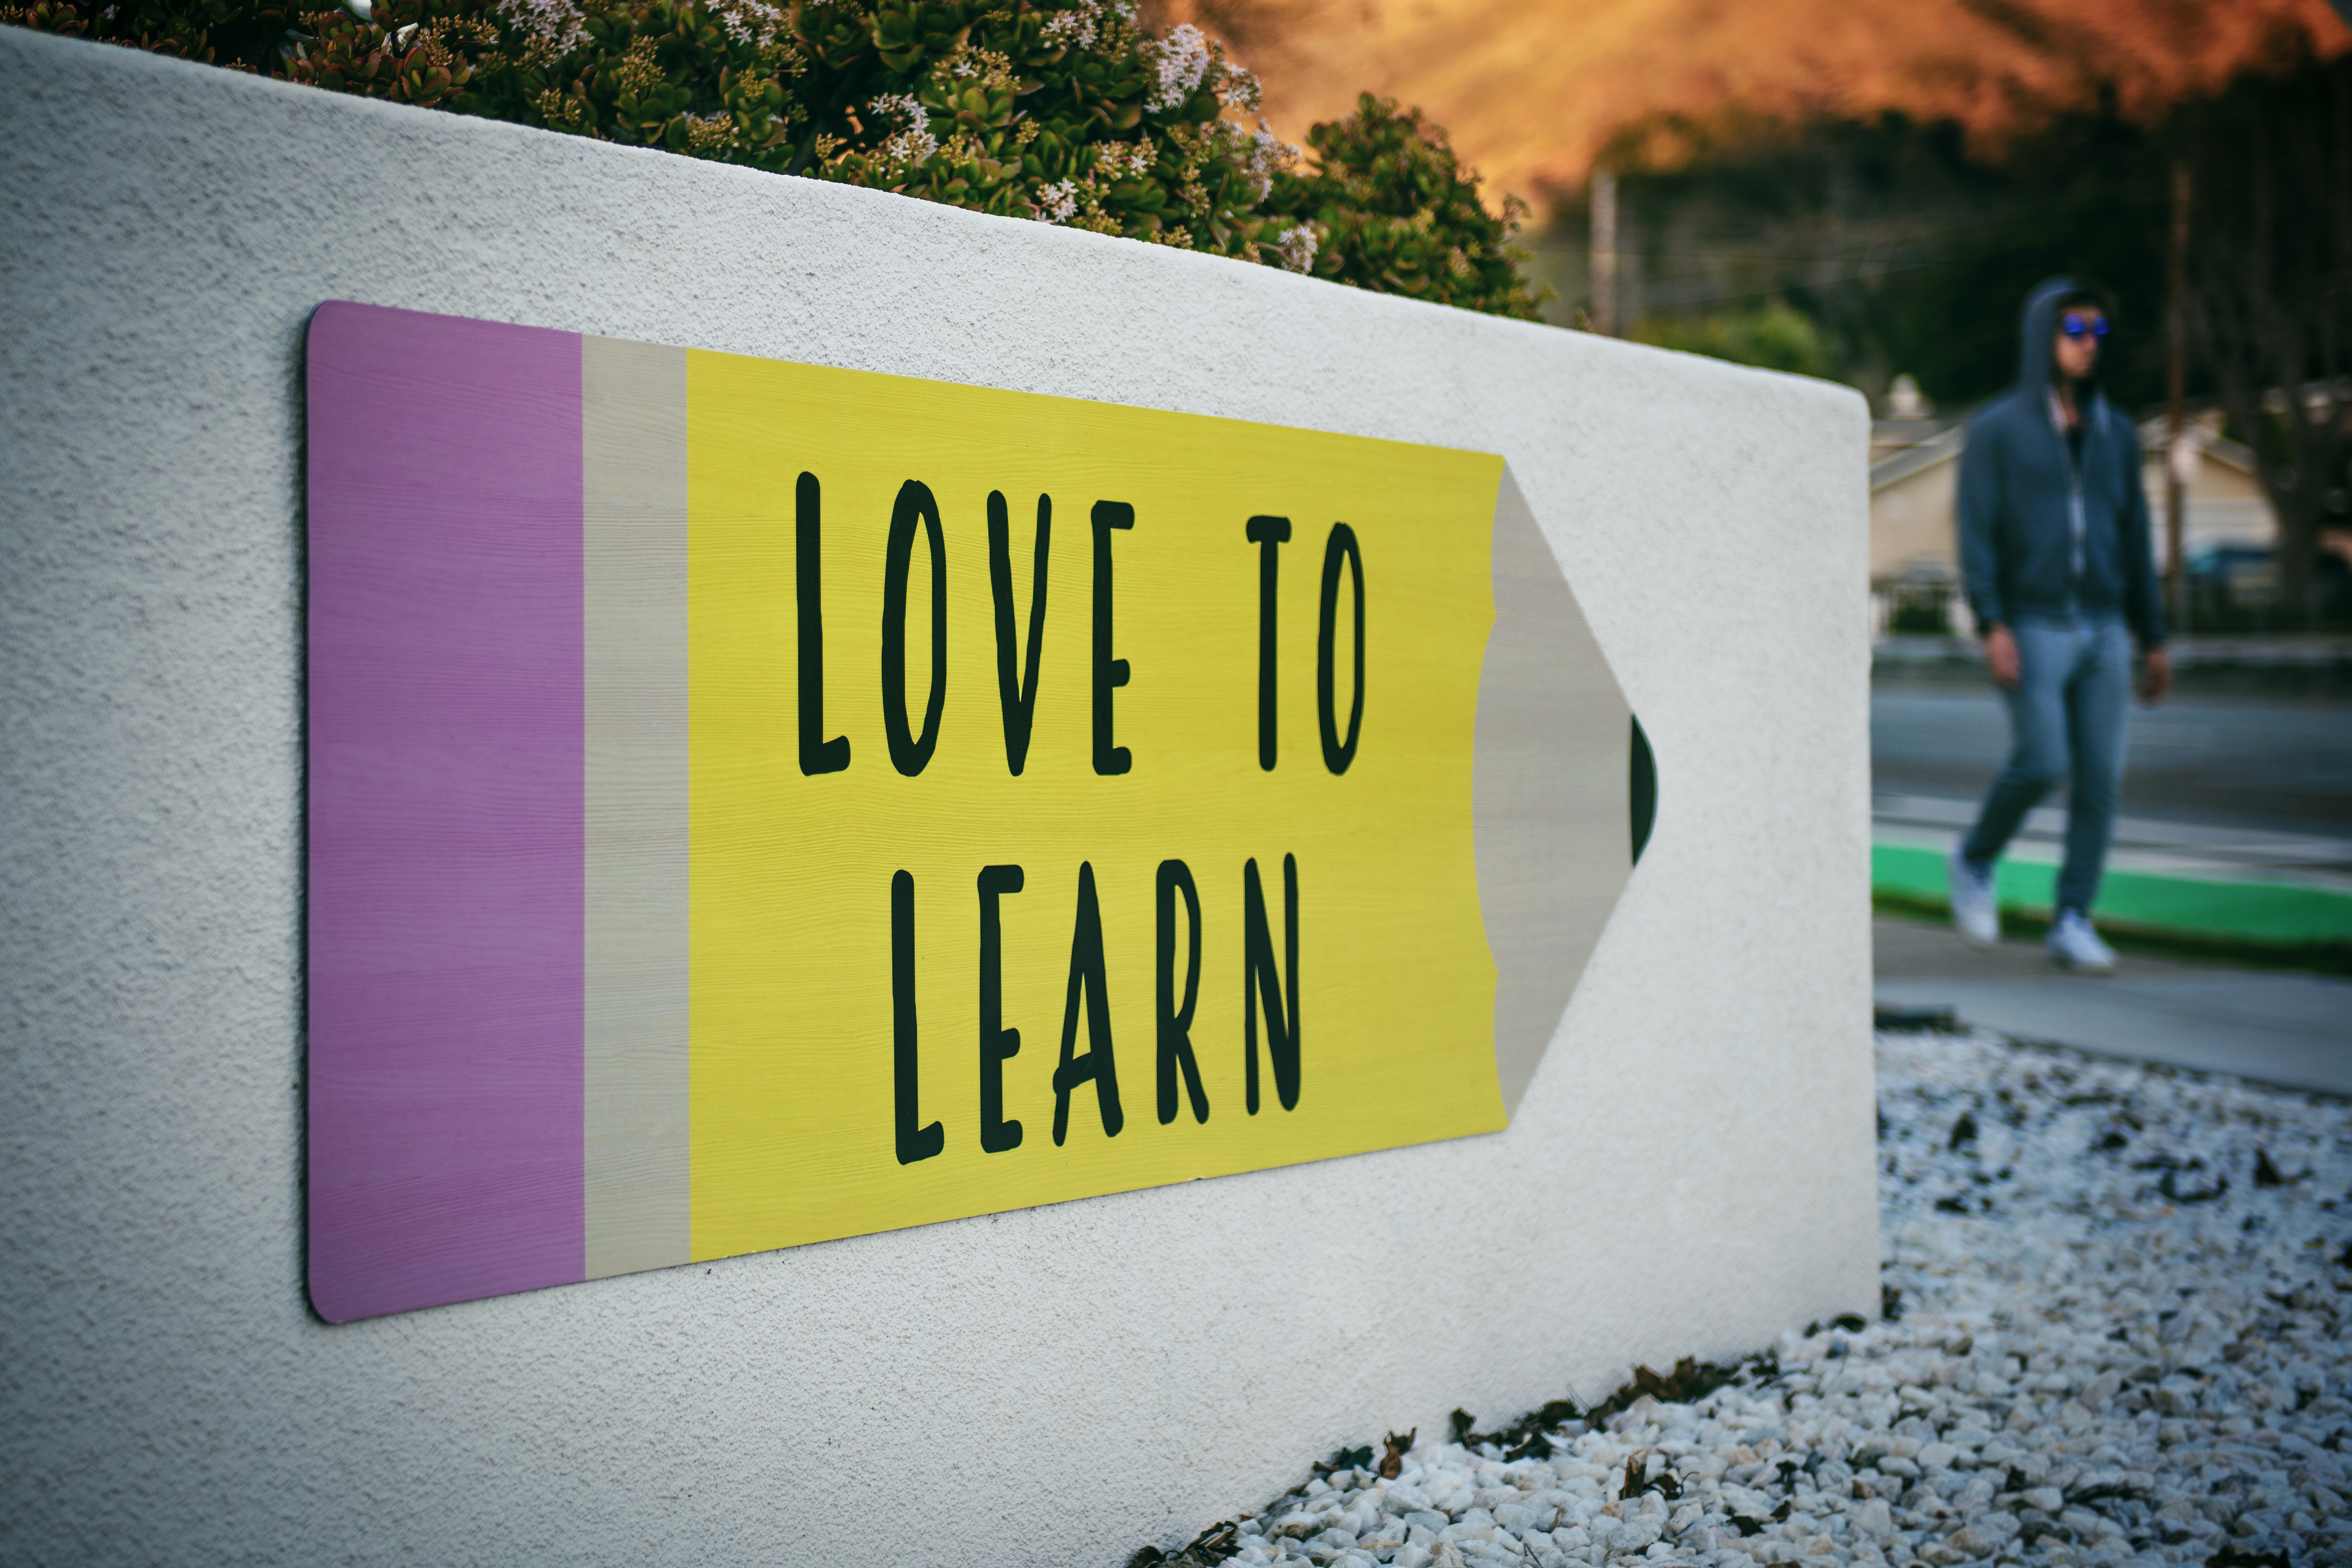 Love to Learn sign in the shape of a pencil at a school.